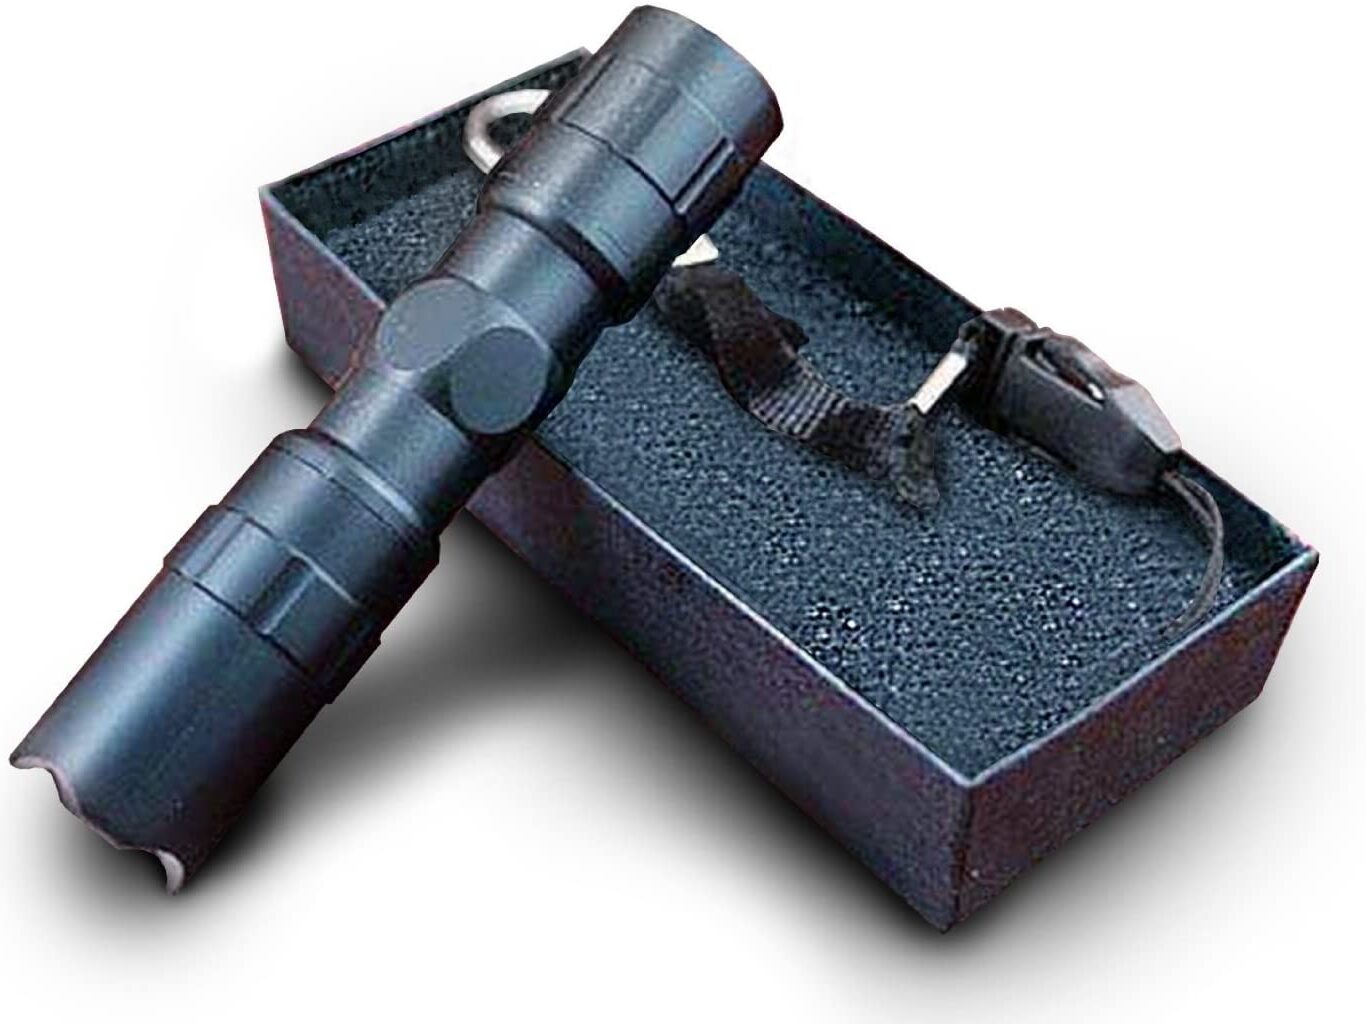 Tactical flashlight to give as boyfriend gift ideas | The Dating Divas